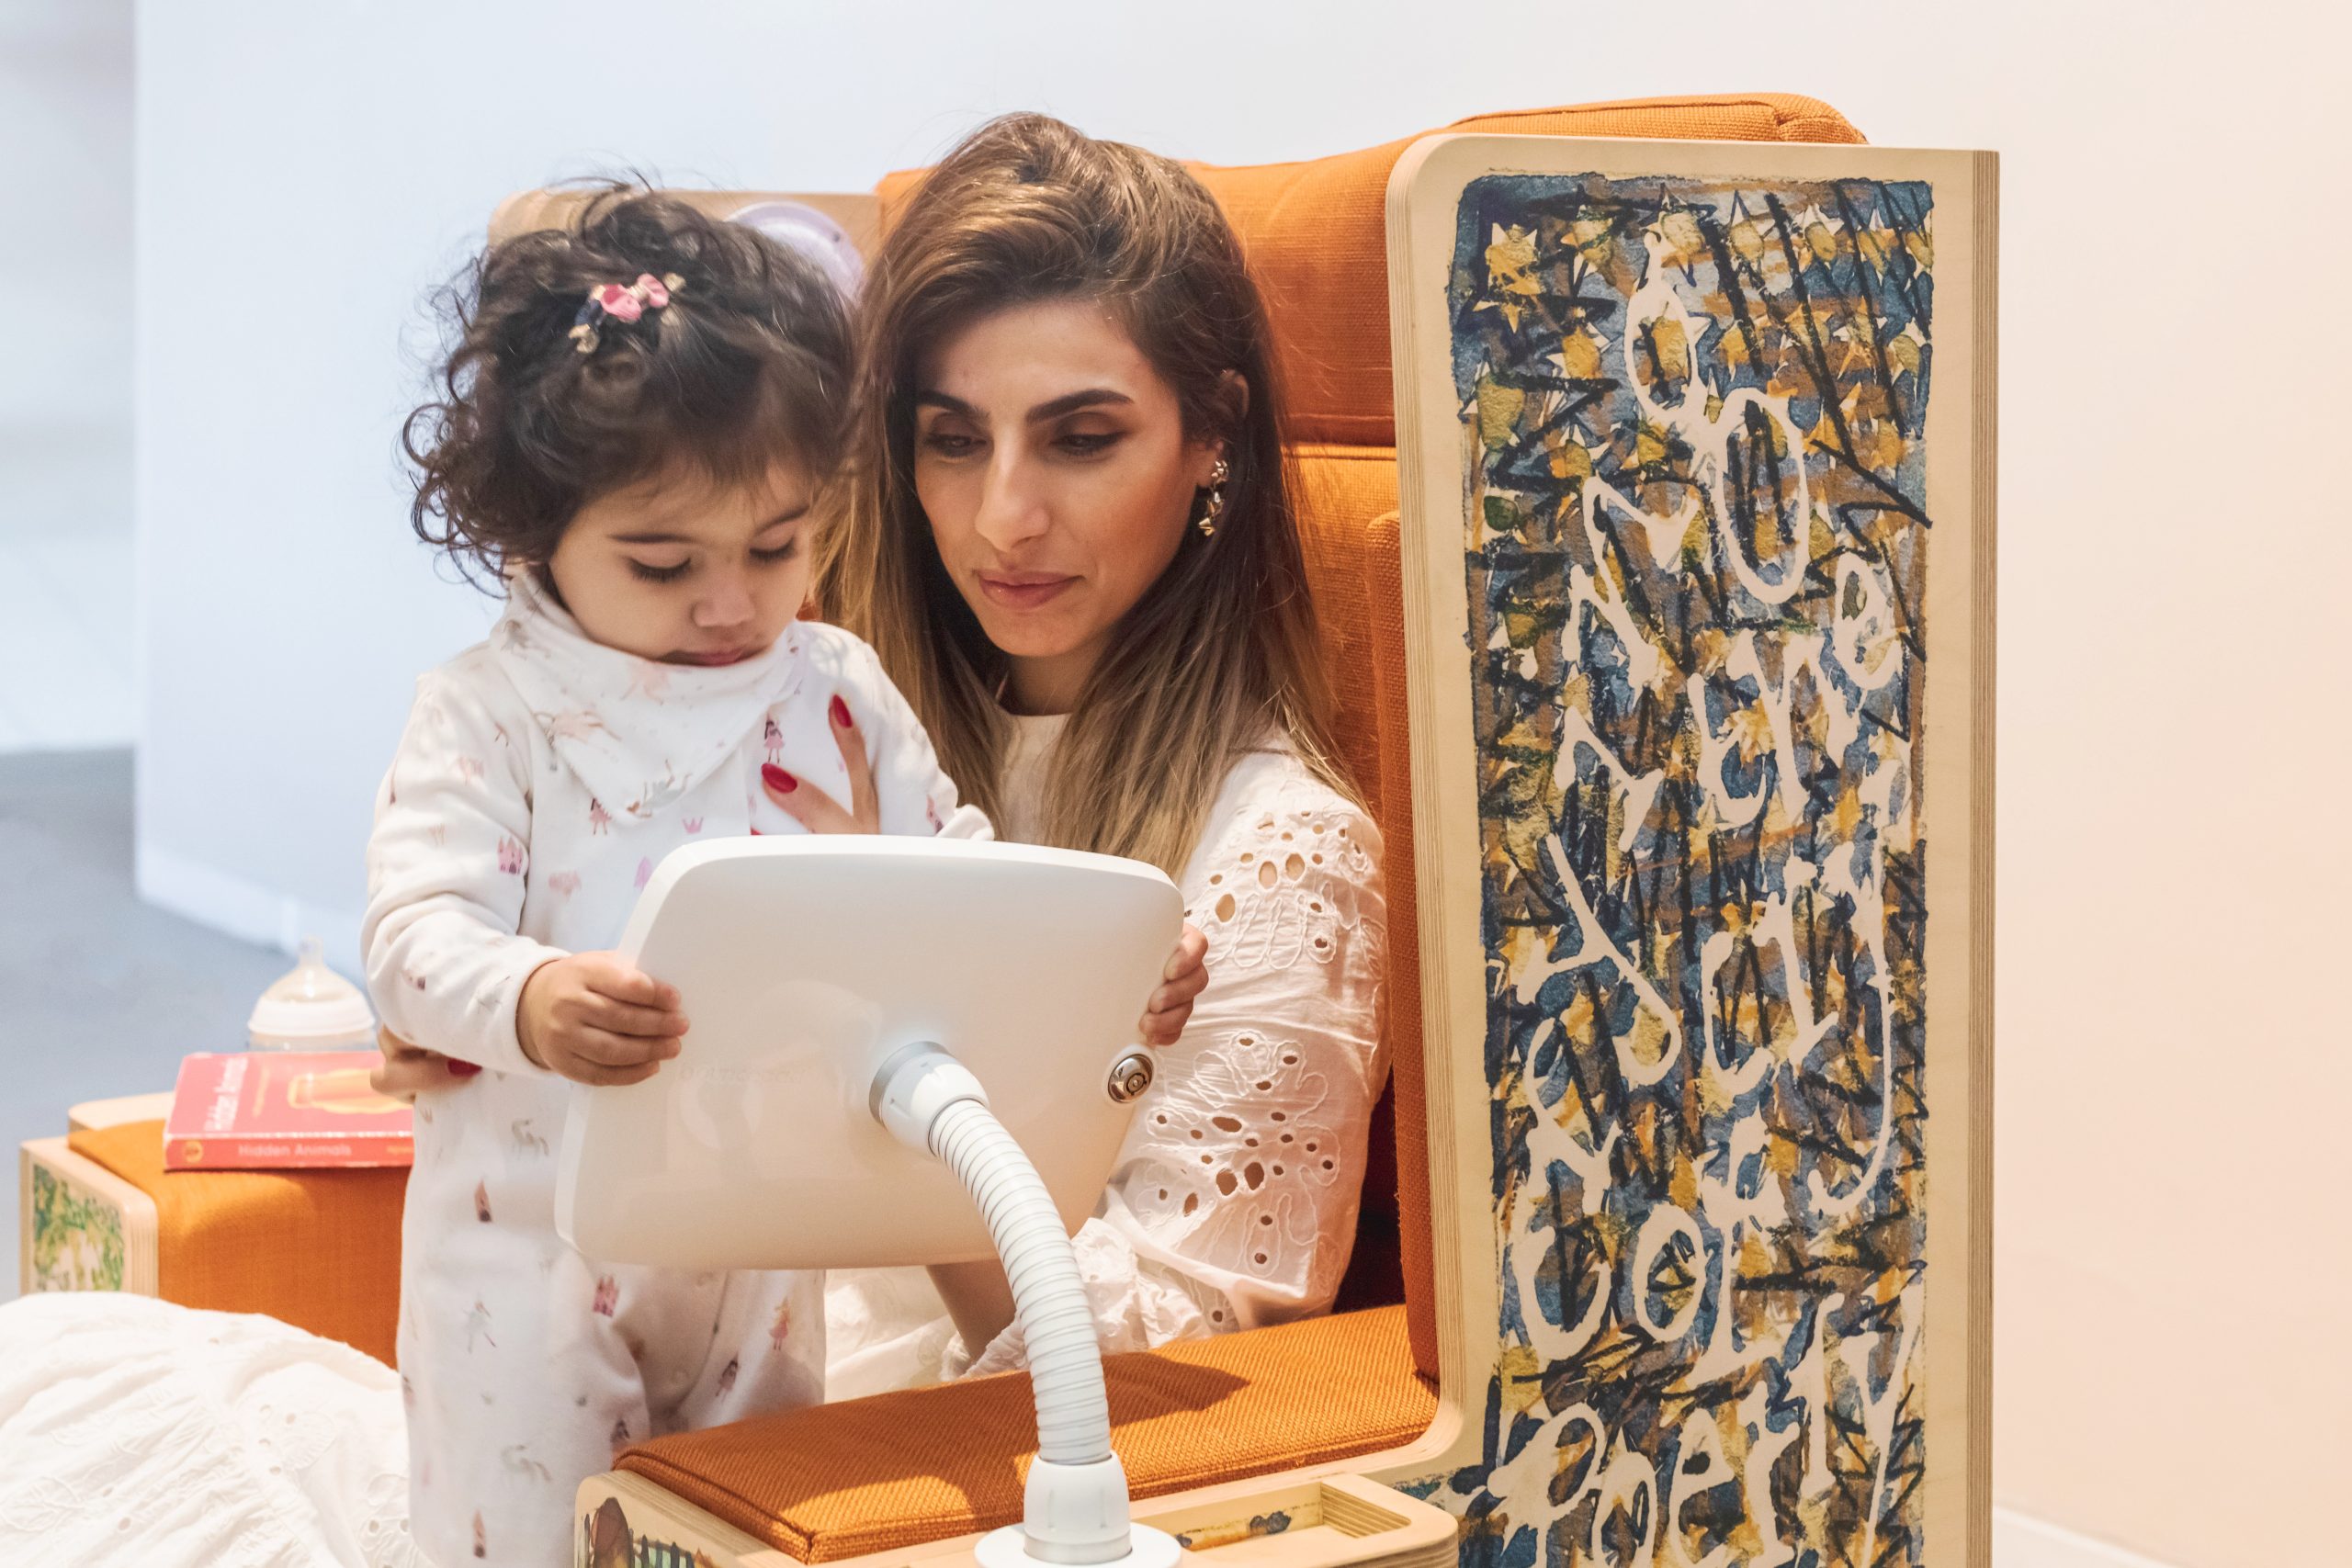 Photograph of a woman with long brown hair sitting in a large chair with a baby on her lap. The baby and woman are both dressed in white and looking at an iPad attached to the chair. The chair has a wooden frame and is decorated with drawings.